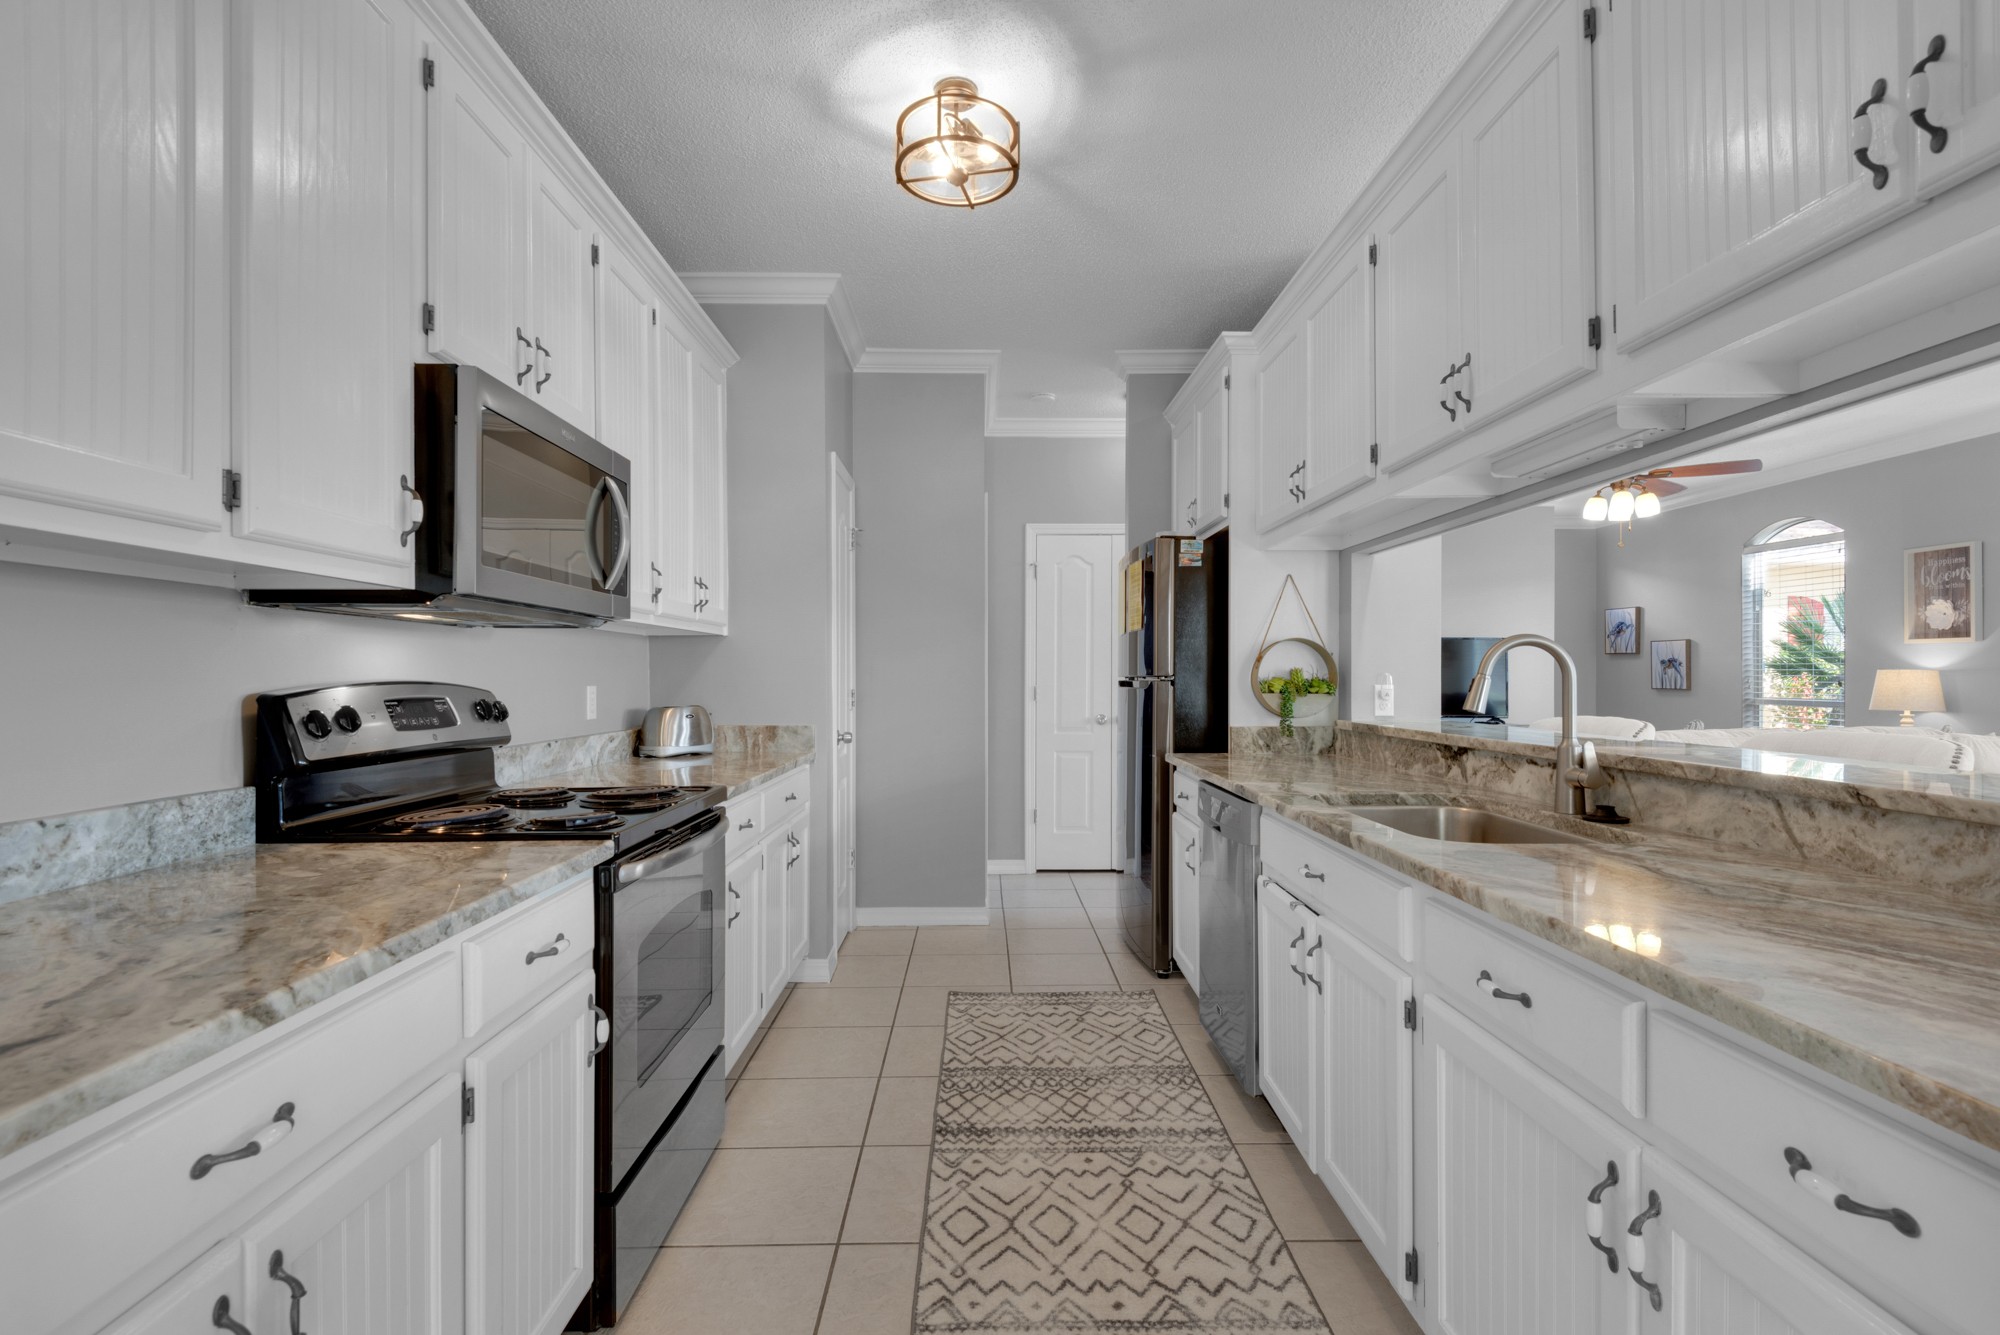 Galley style kitchen features granite countertops and stainless appliances!